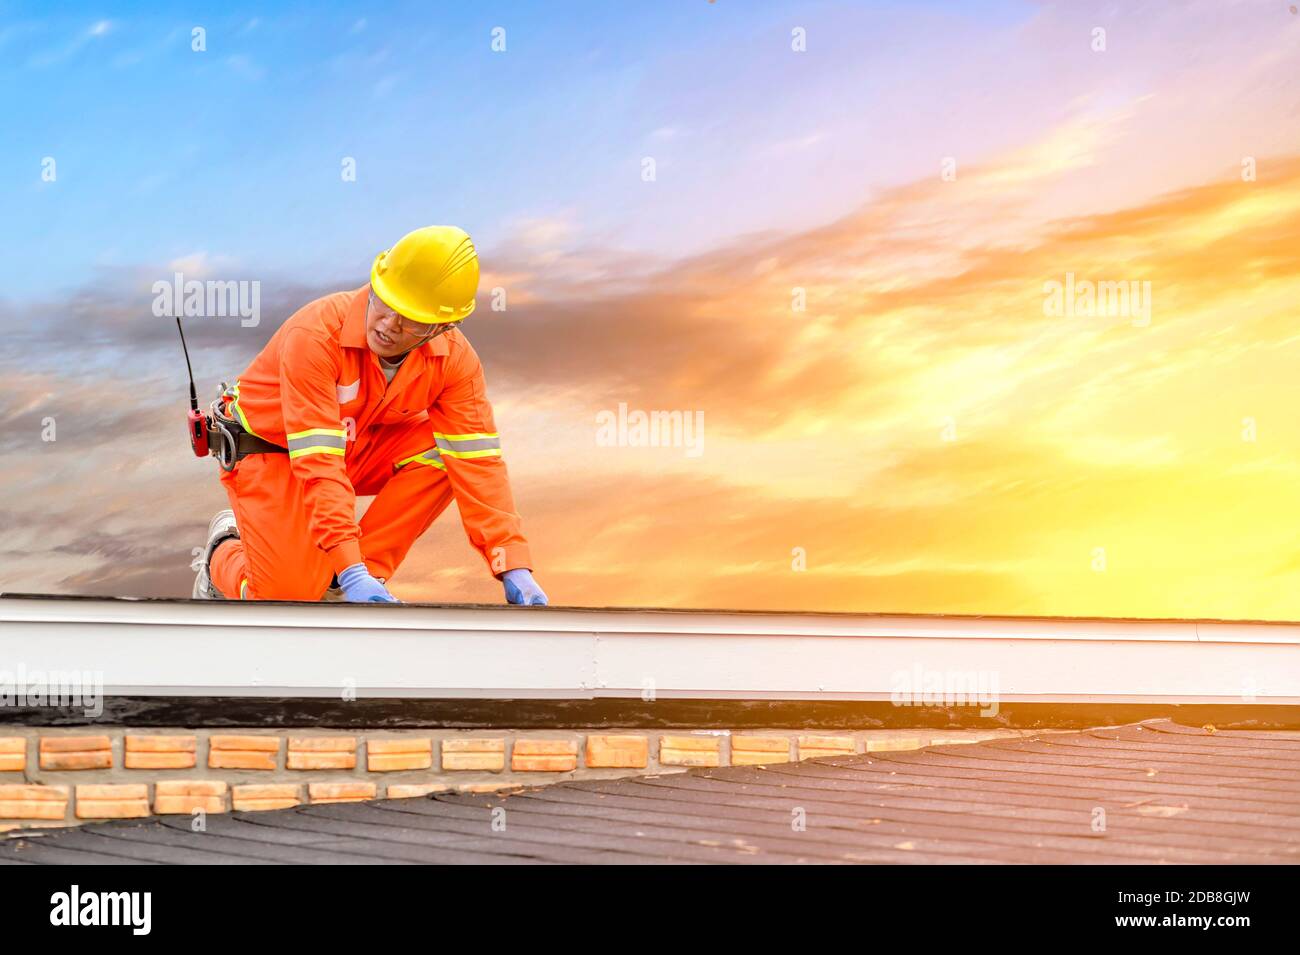 Construction worker working on a roof, Thailand Stock Photo